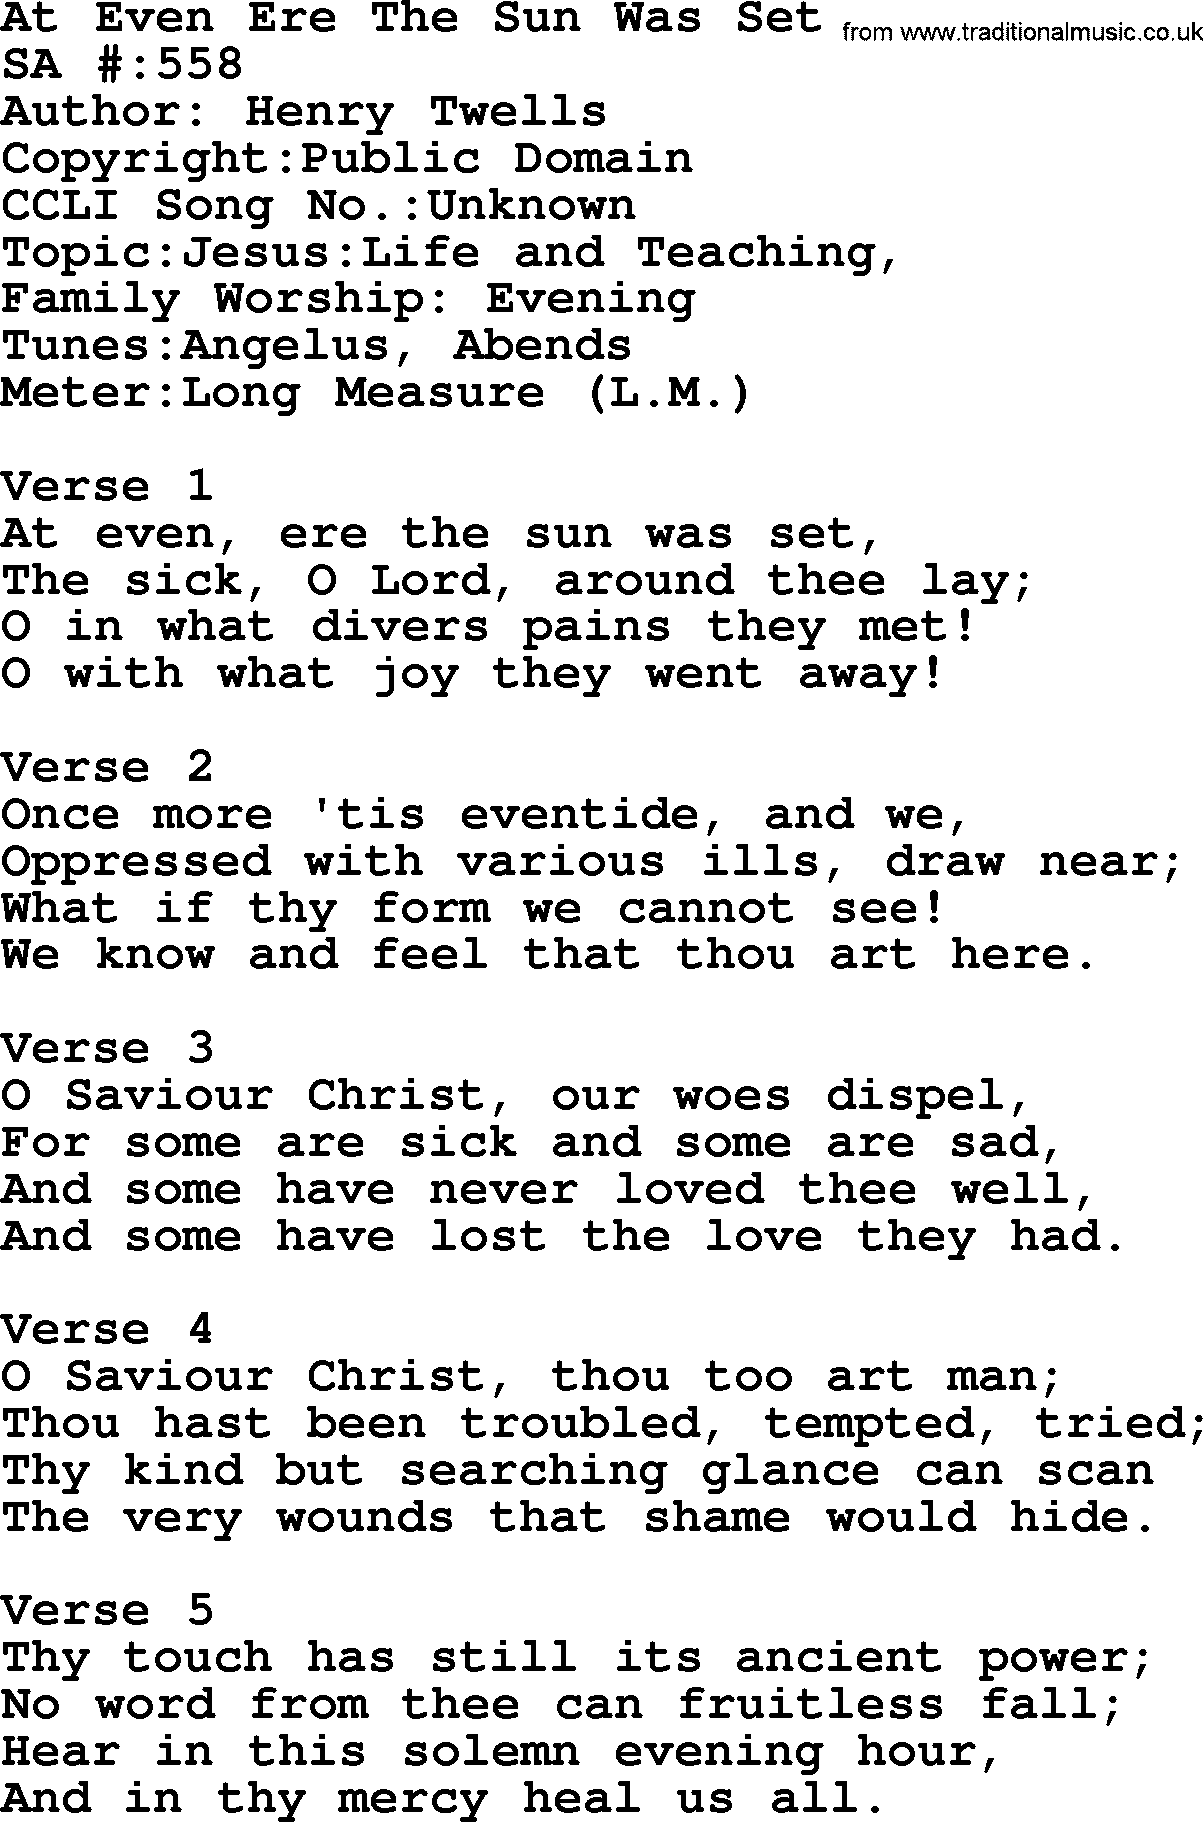 Salvation Army Hymnal, title: At Even Ere The Sun Was Set, with lyrics and PDF,